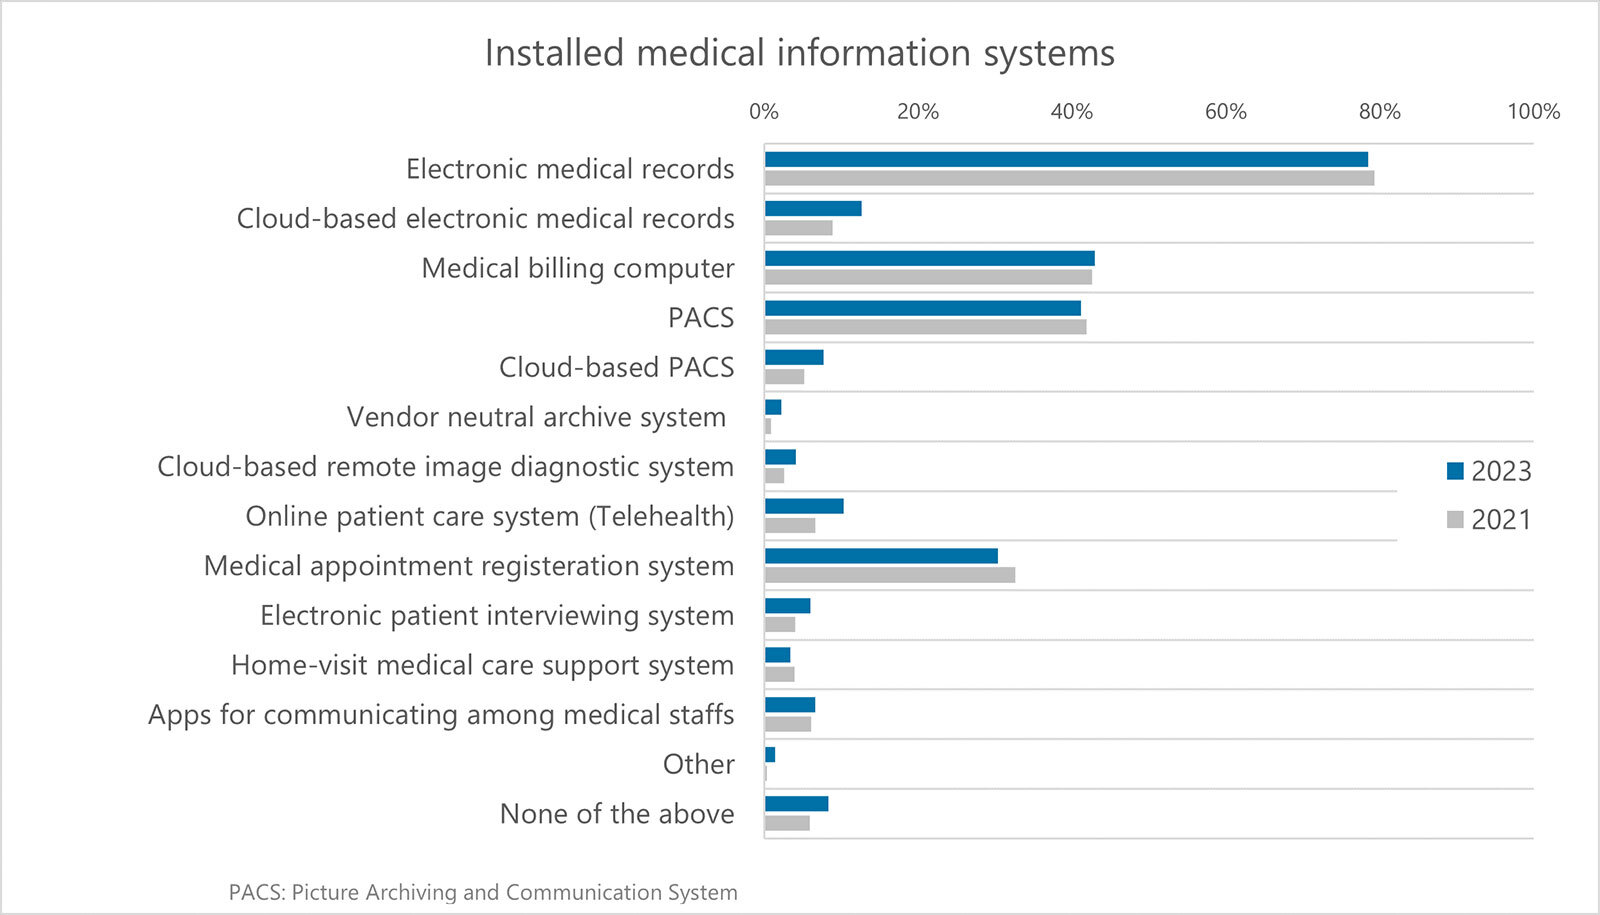 A survey conducted by Nikkei Medical Online, a community for medical professionals operated by Nikkei BP, found that electronic medical records are widely used.